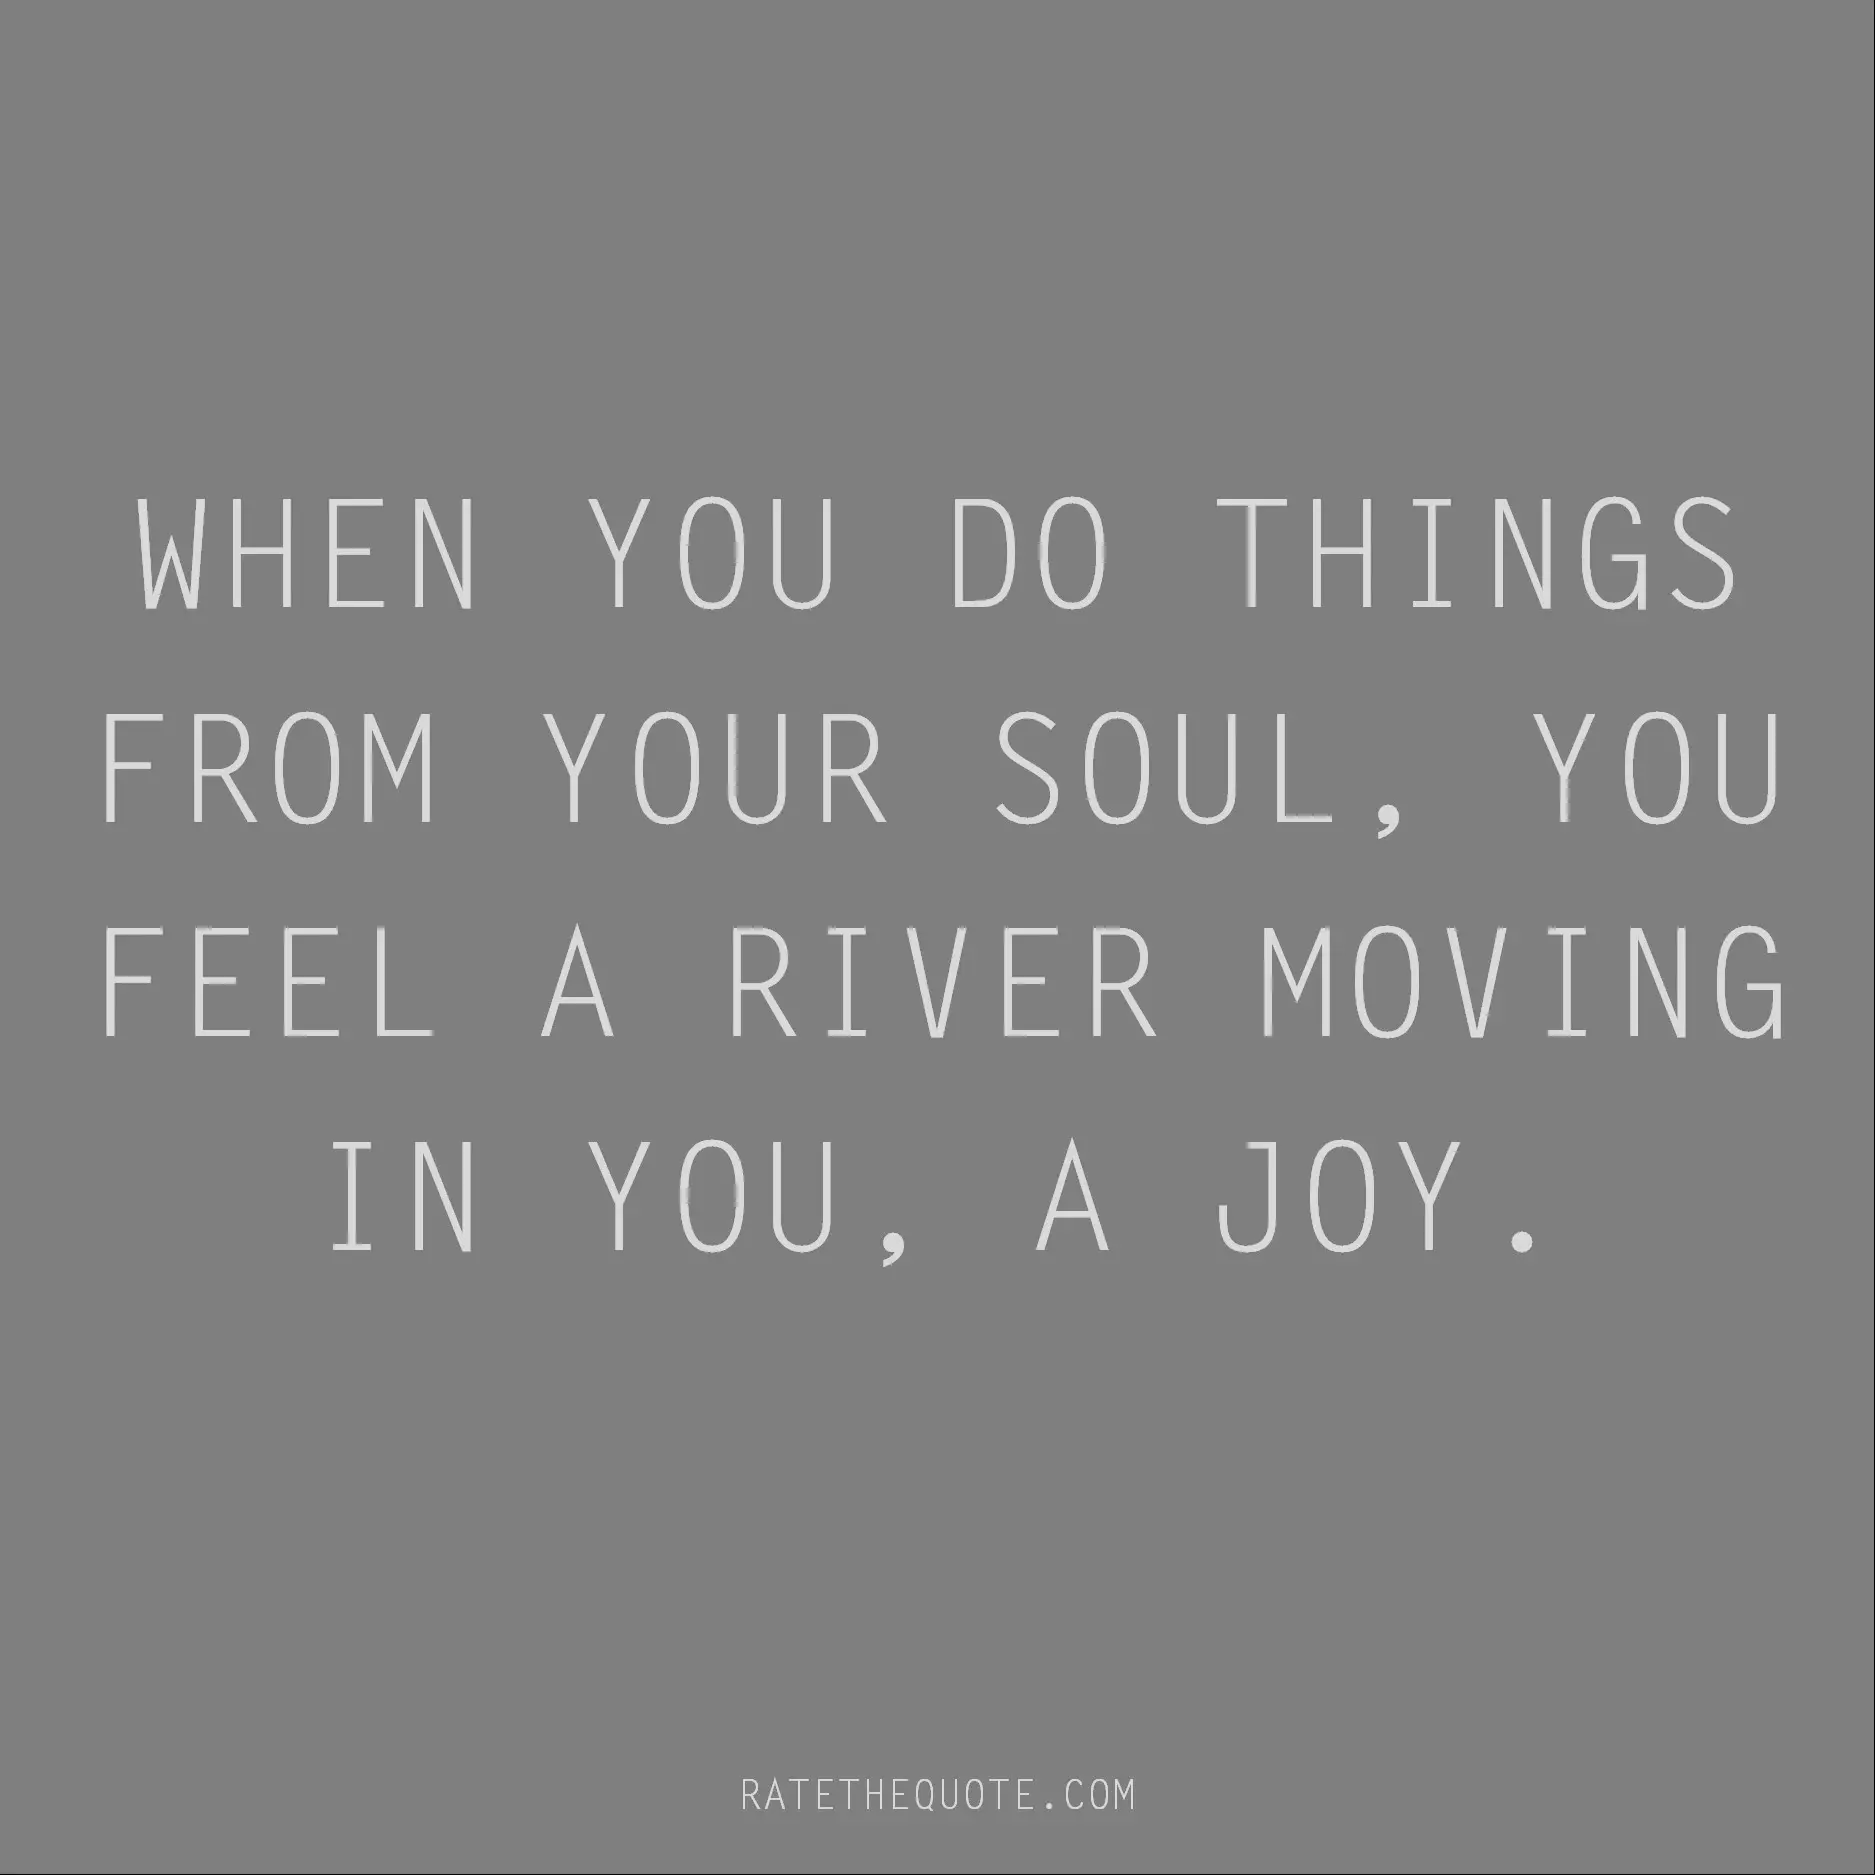 Rumi Quote When you do things from your soul, you feel a river moving in you, a joy.